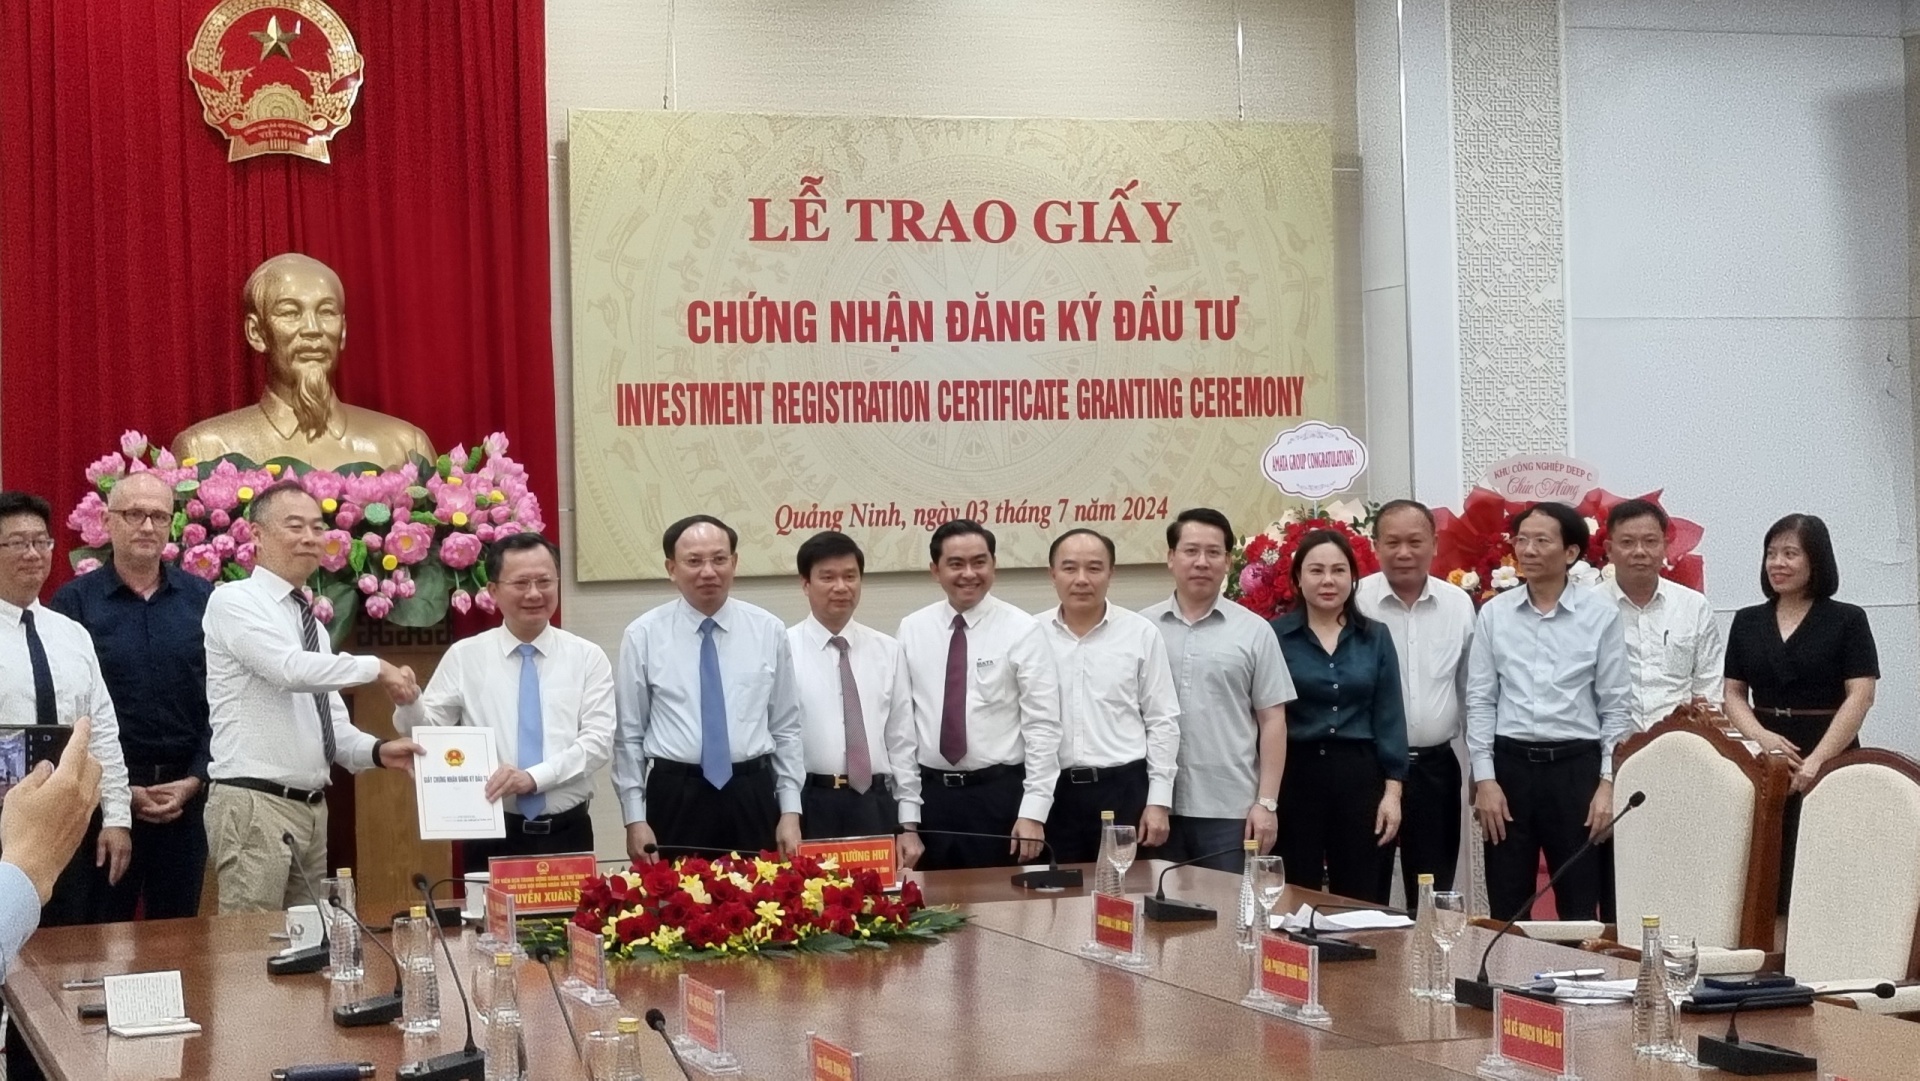 foxconn pledges further 550 million investment in quang ninh